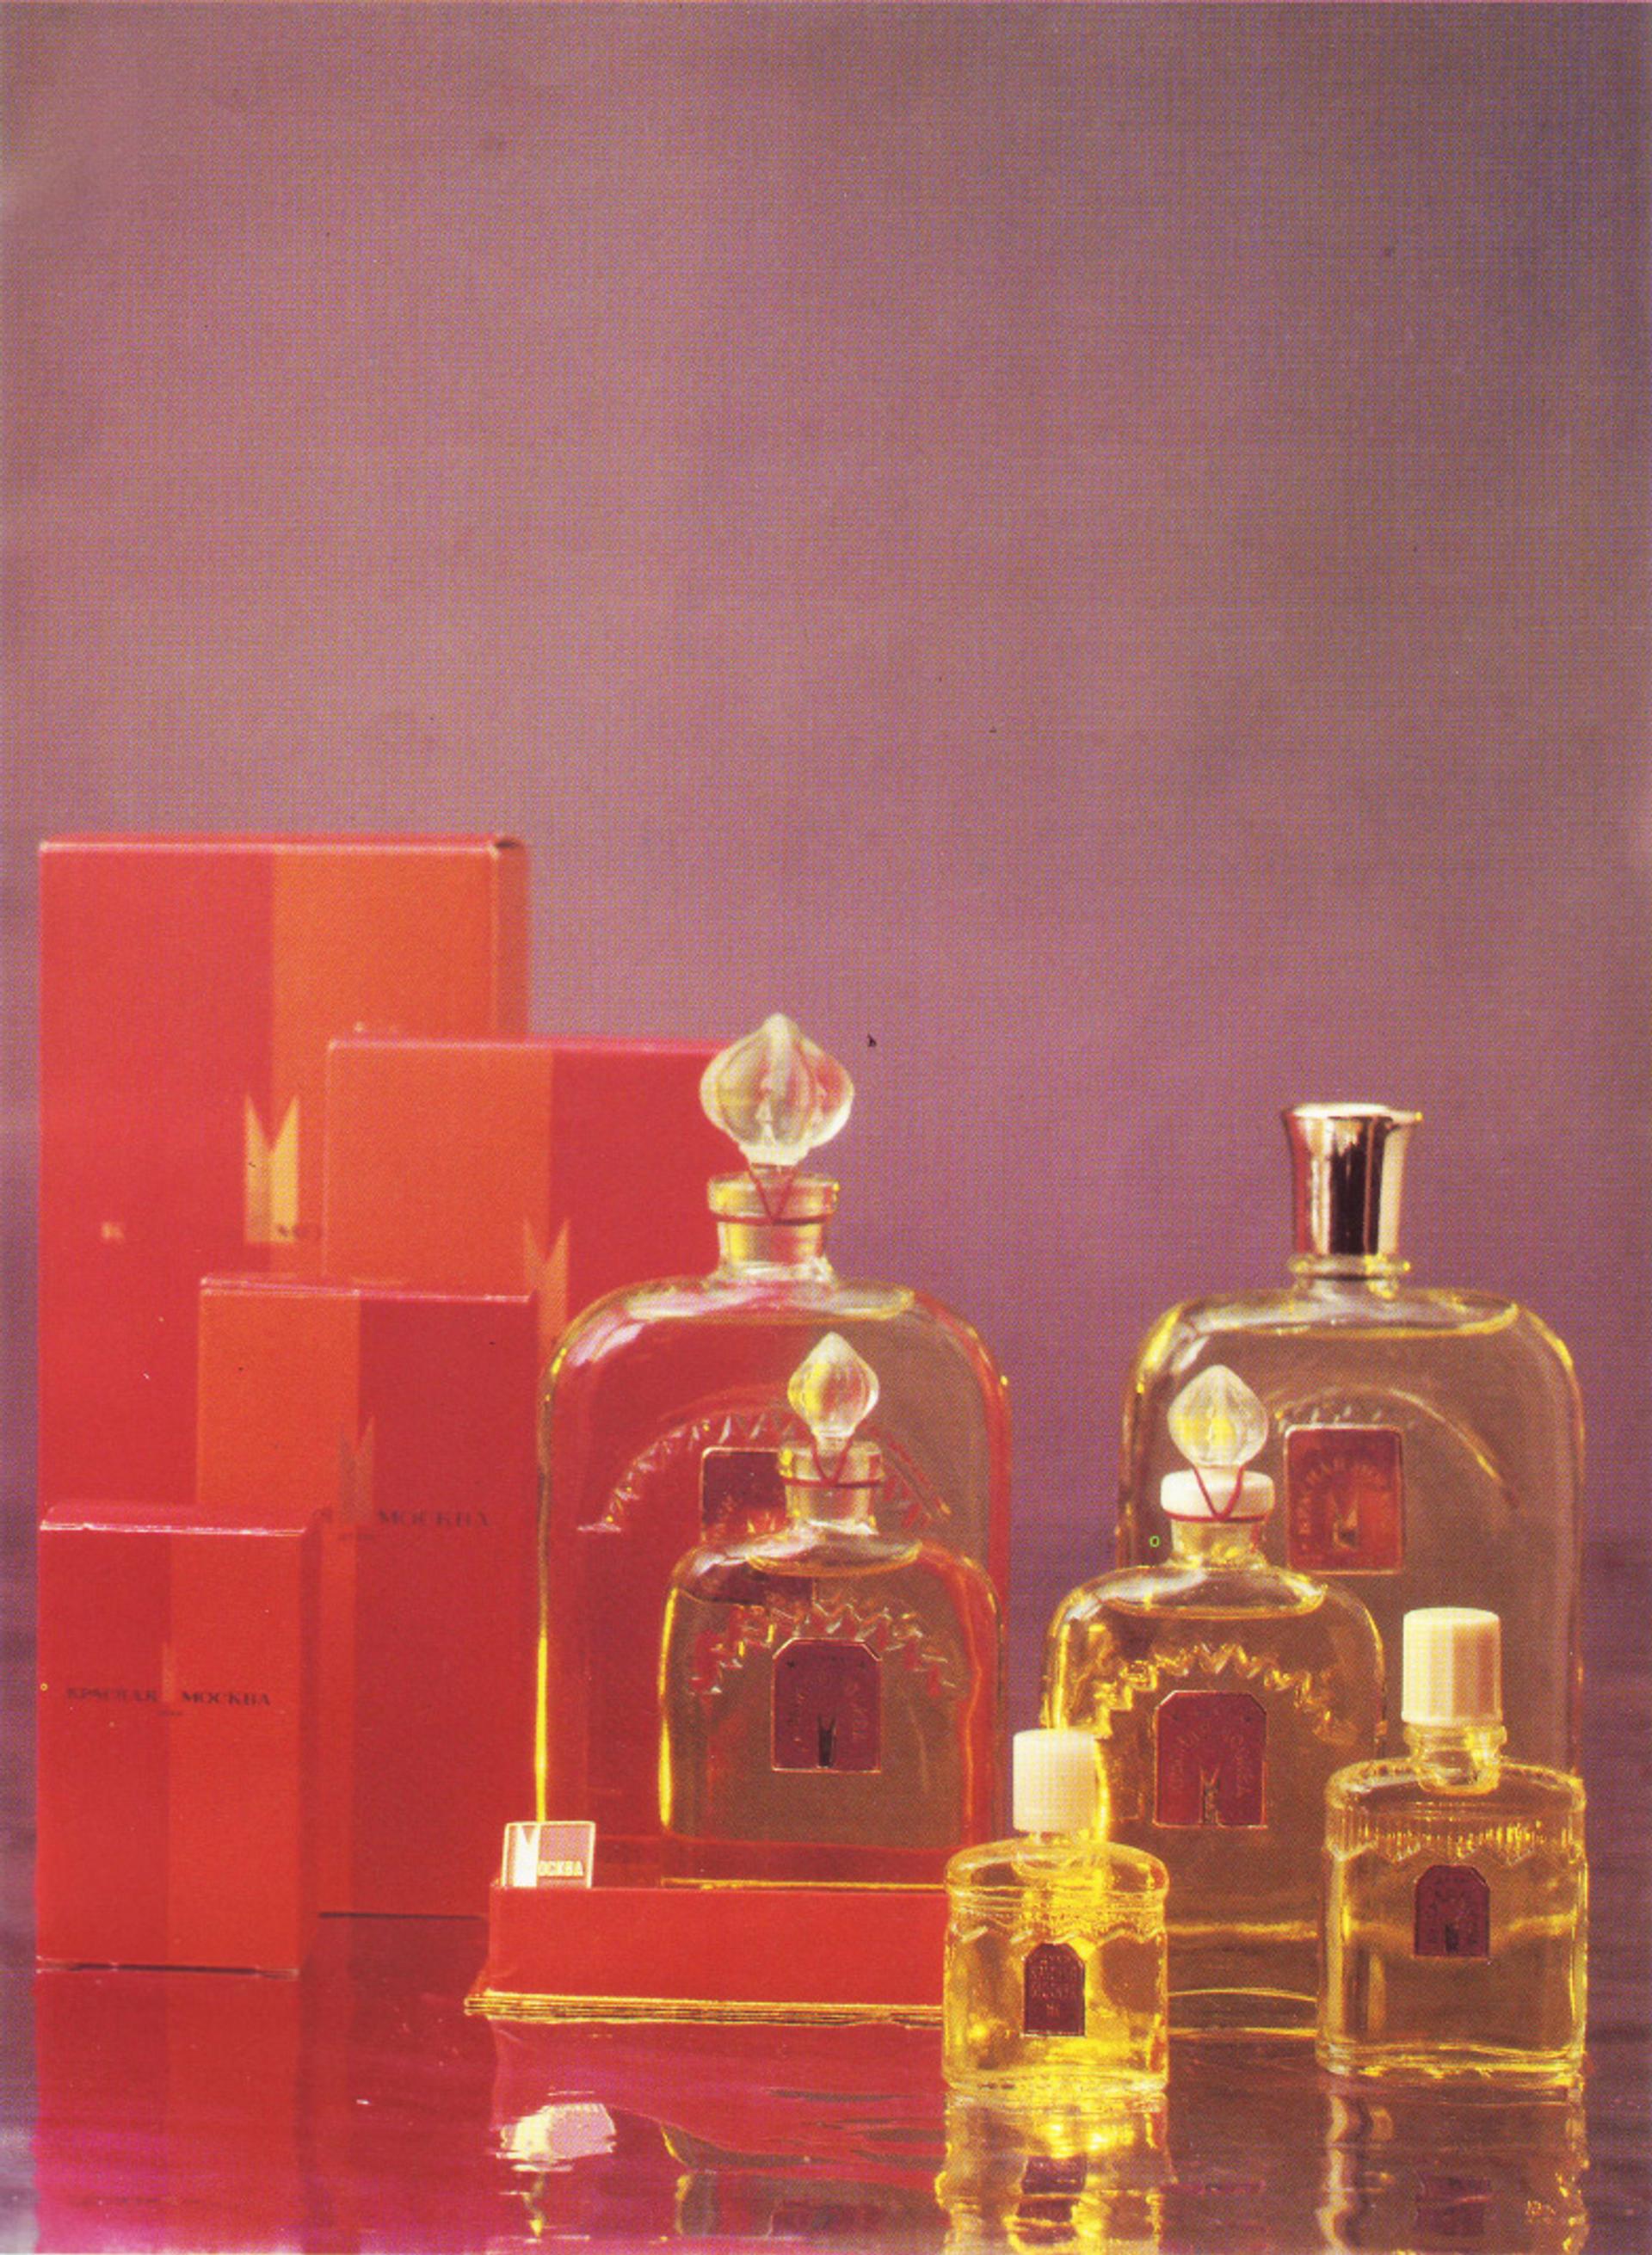 CHANEL No 5, RED MOSCOW, AND THE SCENT OF TOTALITARIANISM 